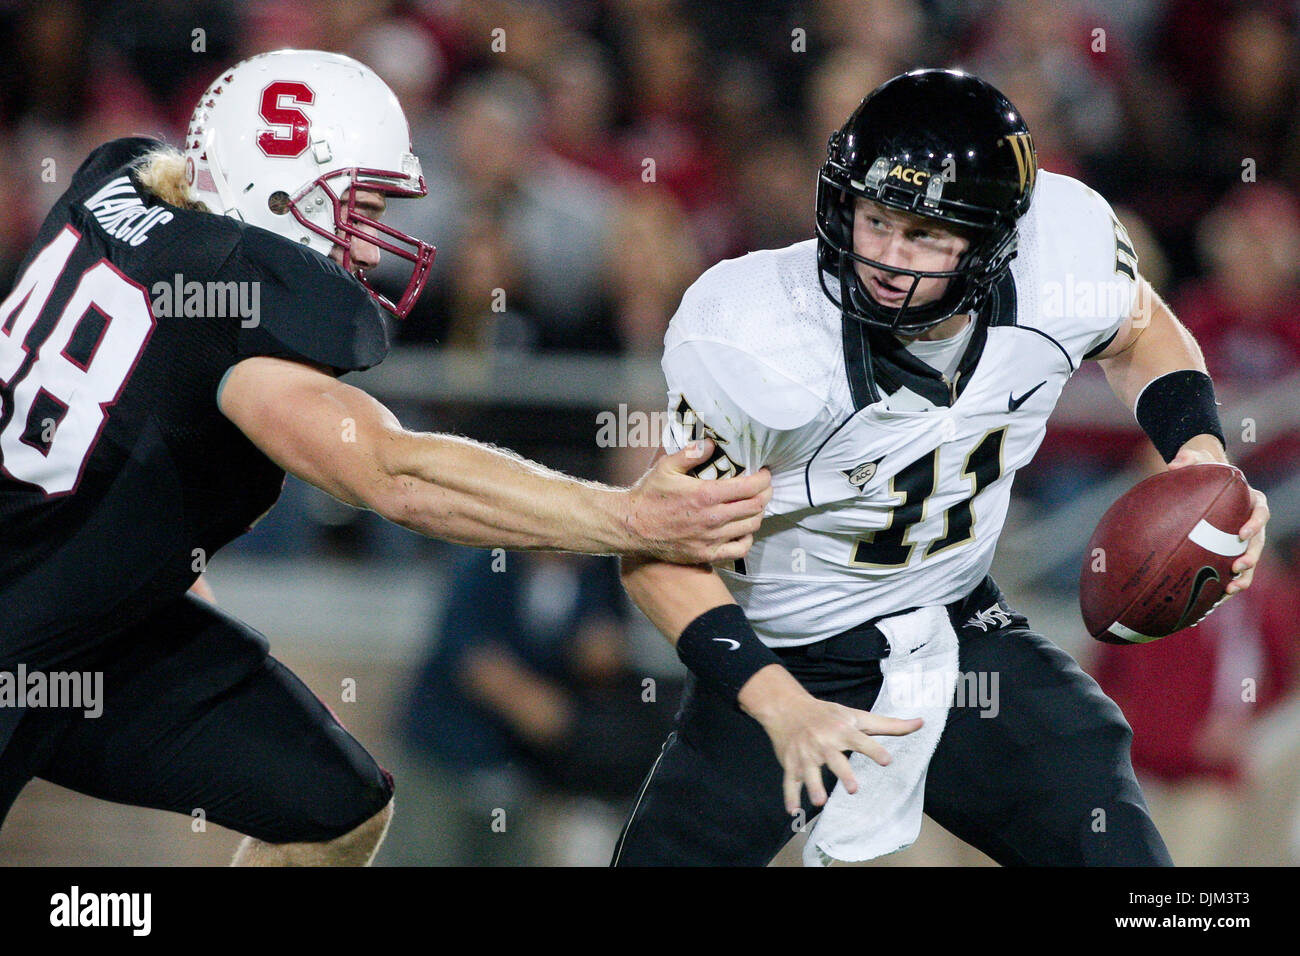 Sept. 18, 2010 - Stanford, California, United States of America - Sept 18, 2010: Stanford, Calif. - Lake Forest QB Tanner Price (11) is sacked by Stanford FB Owen Merecic (48) during game action on Saturday at Stanford Stadium. Stanford leads Wake Forest 41 - 7 late in the first half. (Credit Image: © Konsta Goumenidis/Southcreek Global/ZUMApress.com) Stock Photo